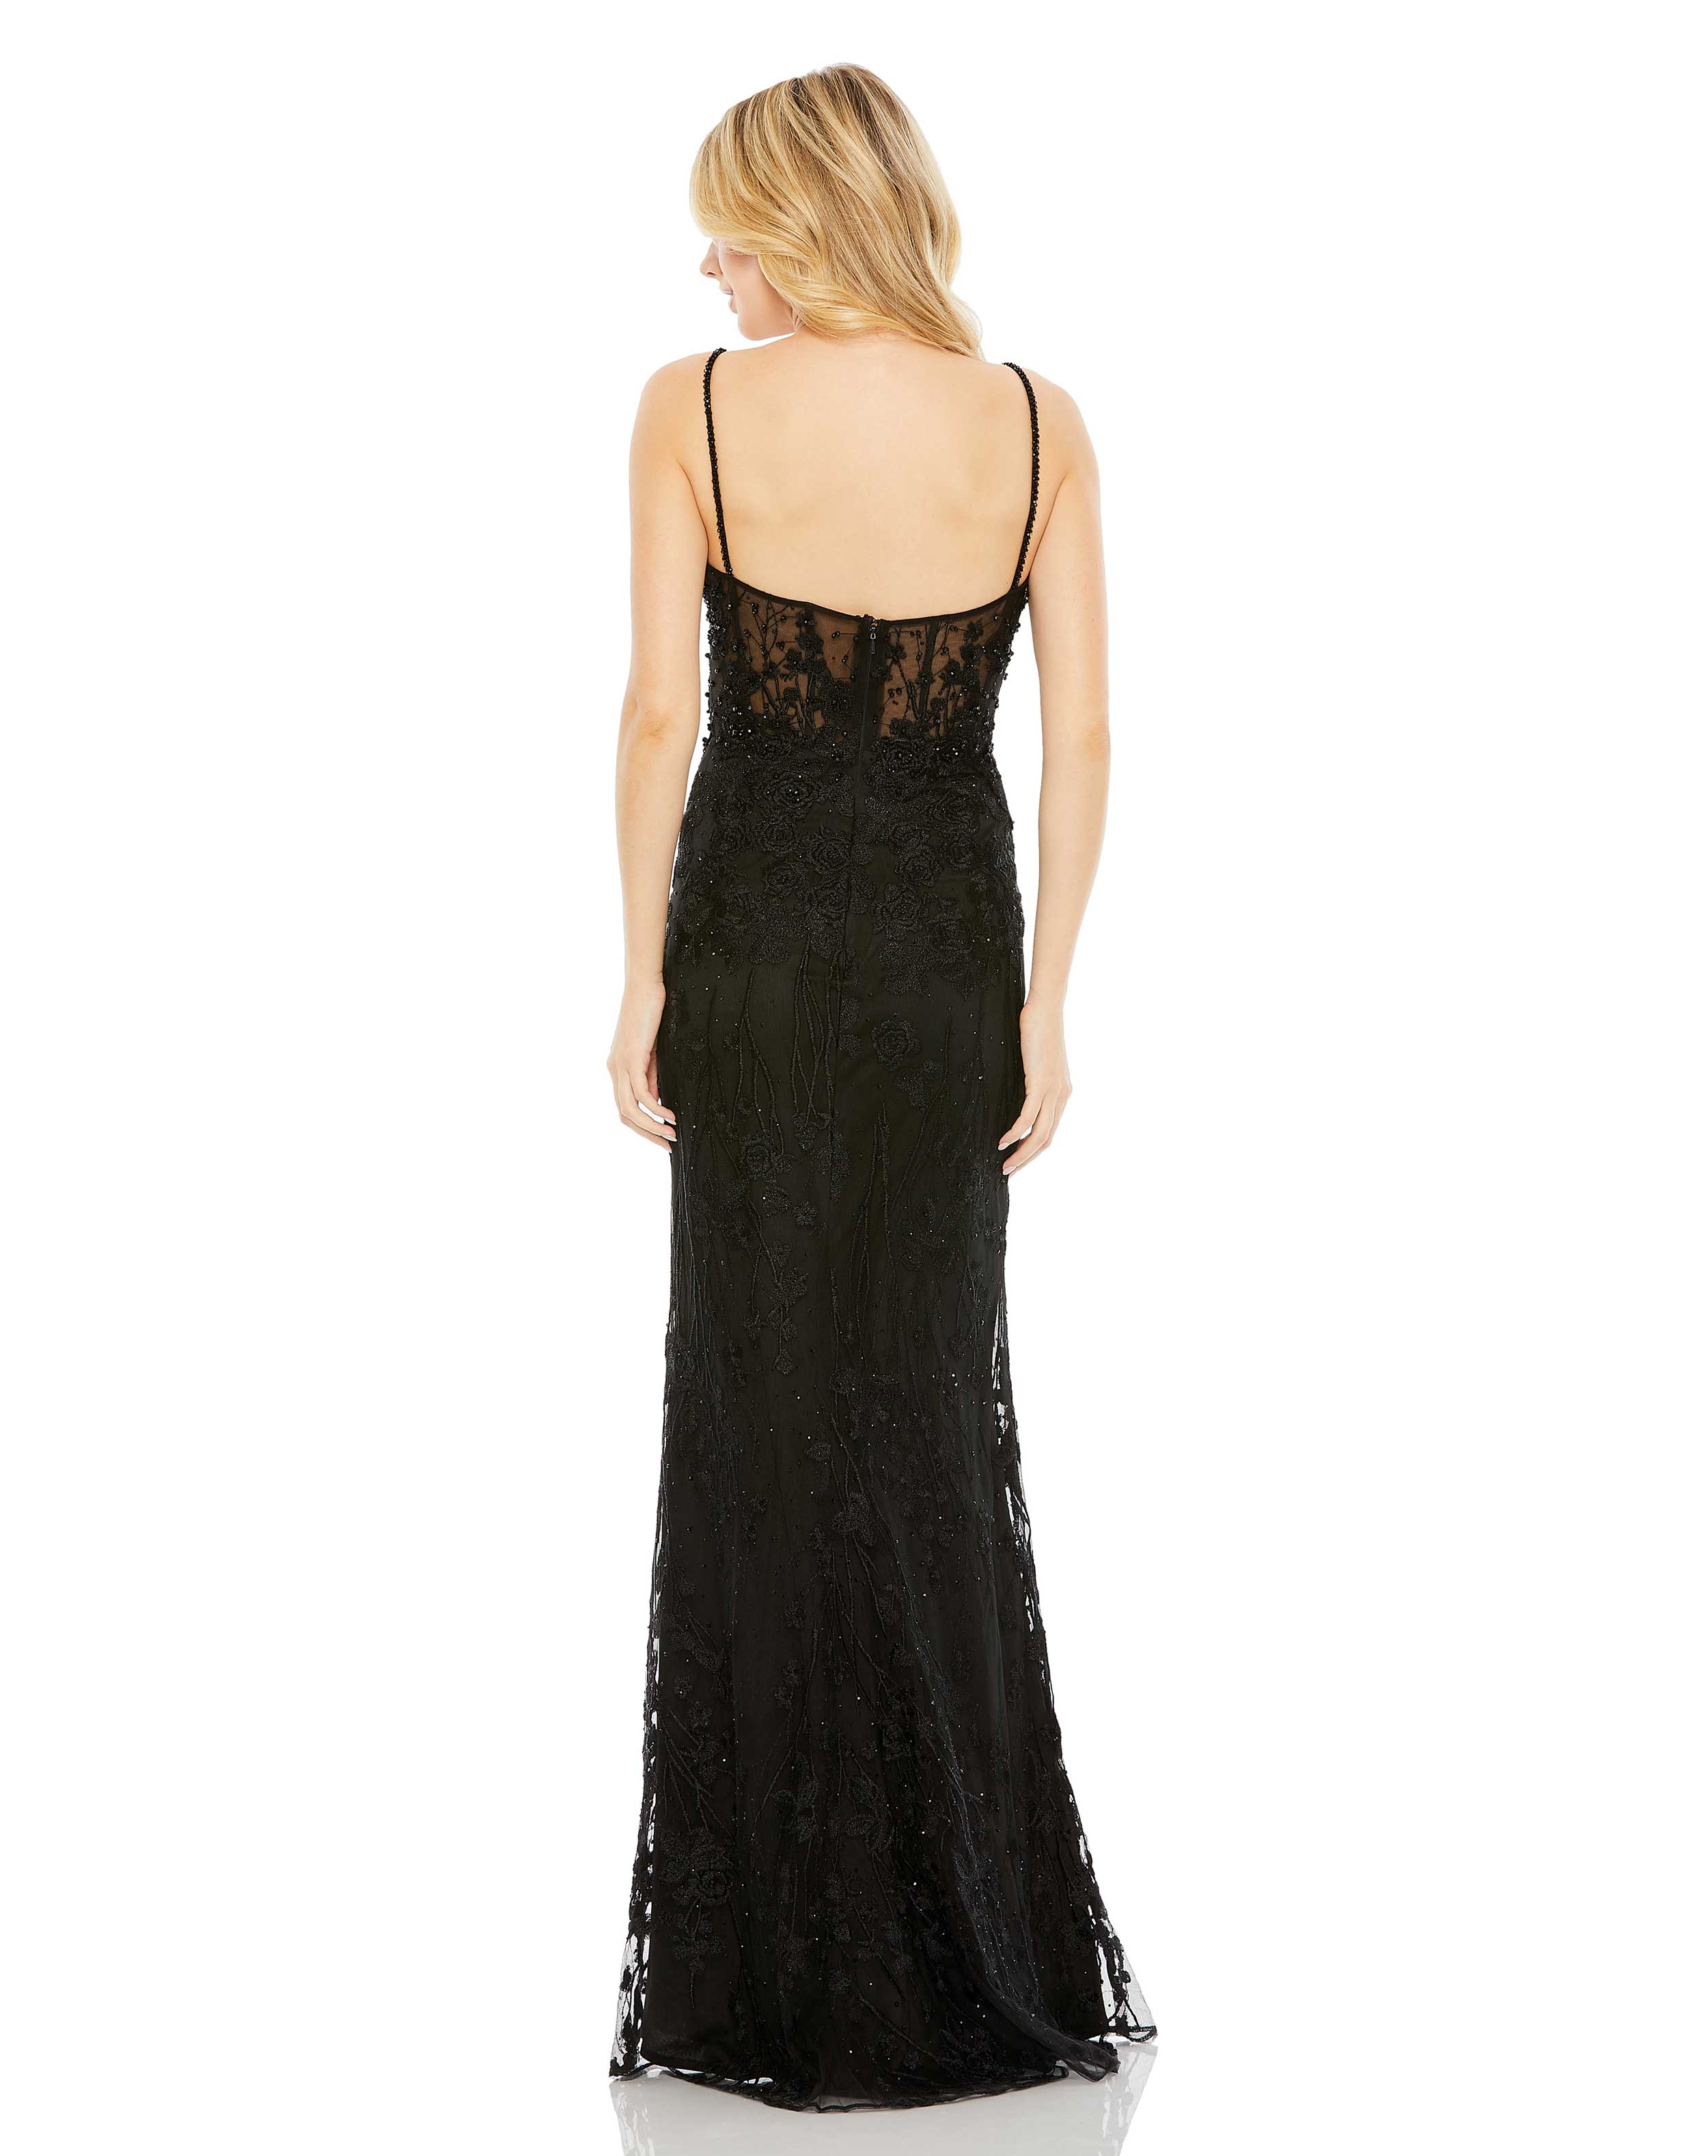 Embellished Sleeveless Illusion Bodice Gown - FINAL SALE